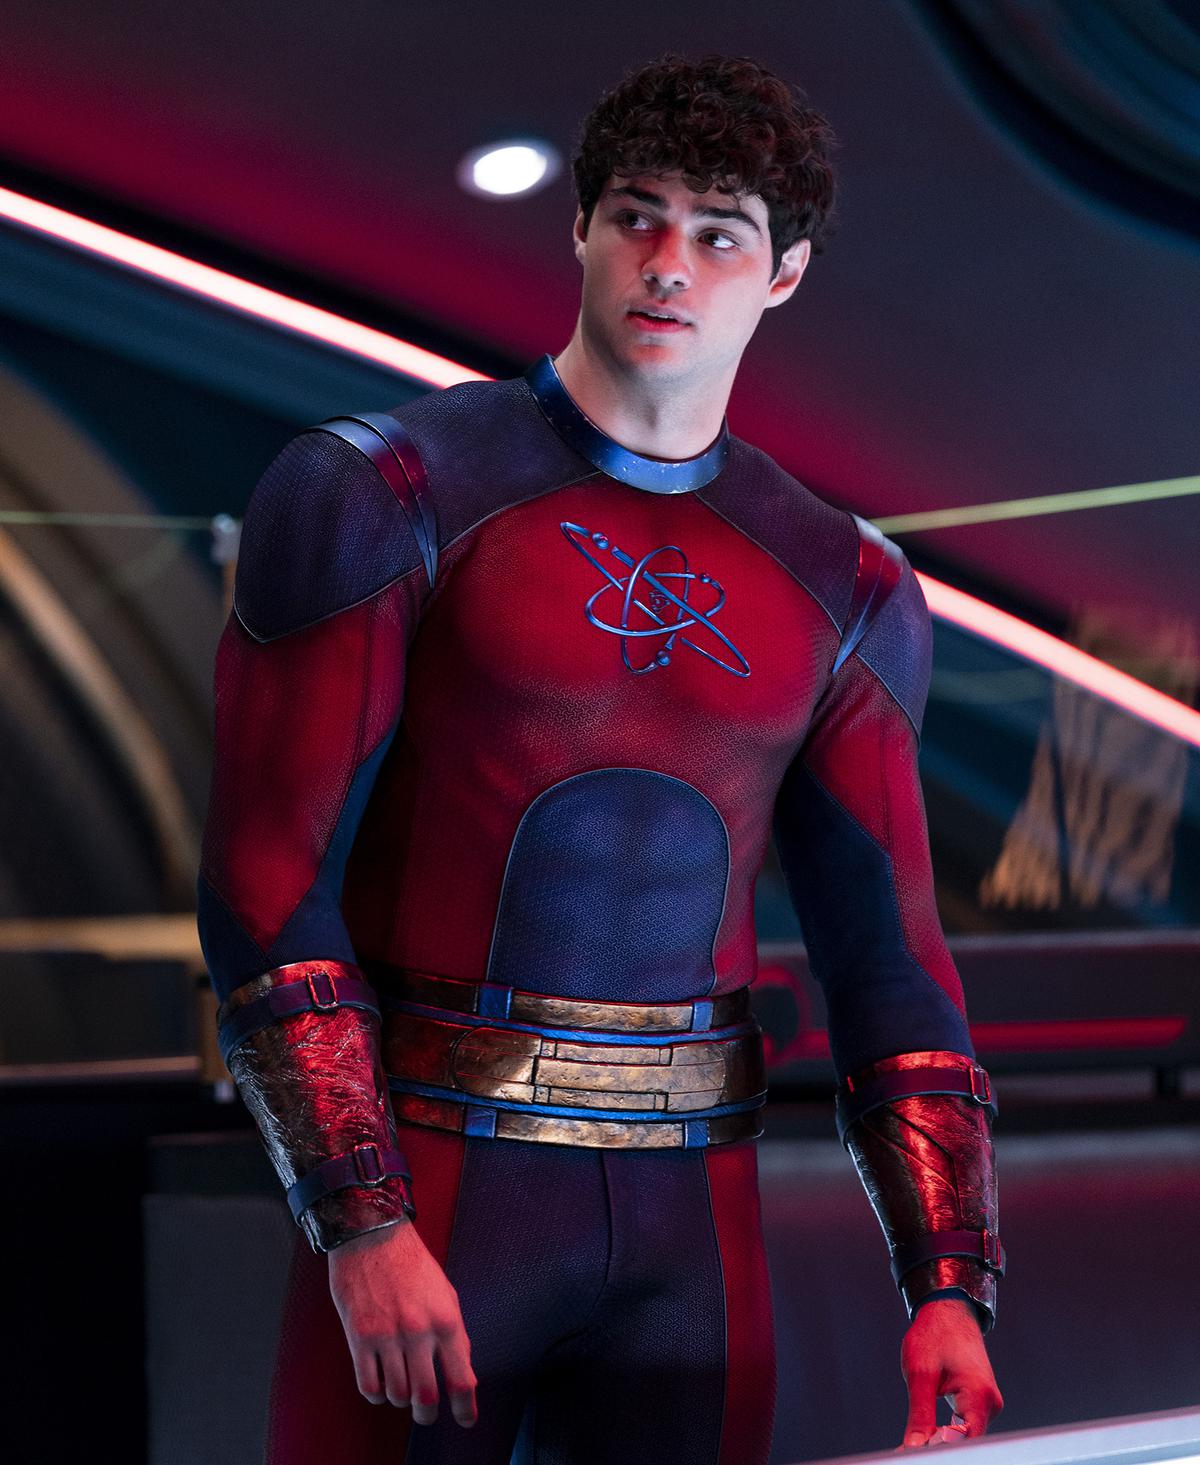 Noah Centineo on working with Dwayne Johnson on ‘Black Adam’: ‘Everything you could possibly imagine and more’